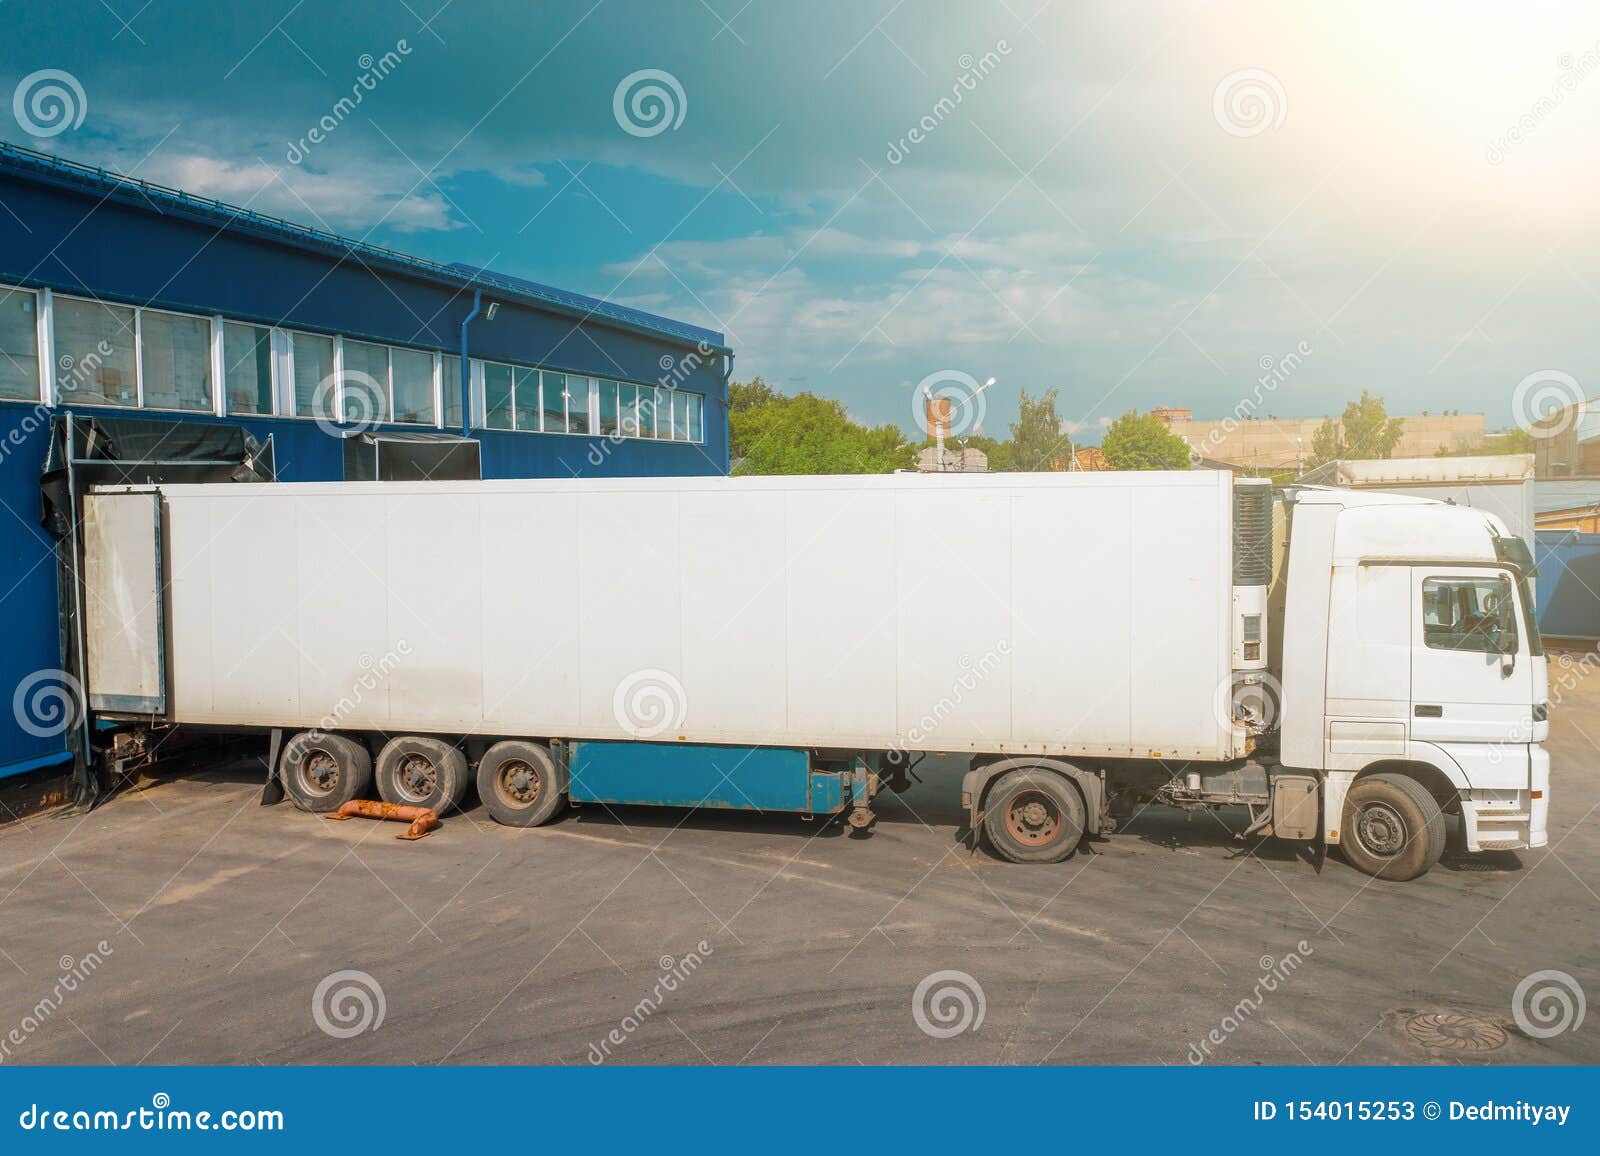 Cargo Truck In Industrial Warehouse Or Logistic Center Waiting For Loading Goods Stock Image Image Of Construction Container 154015253